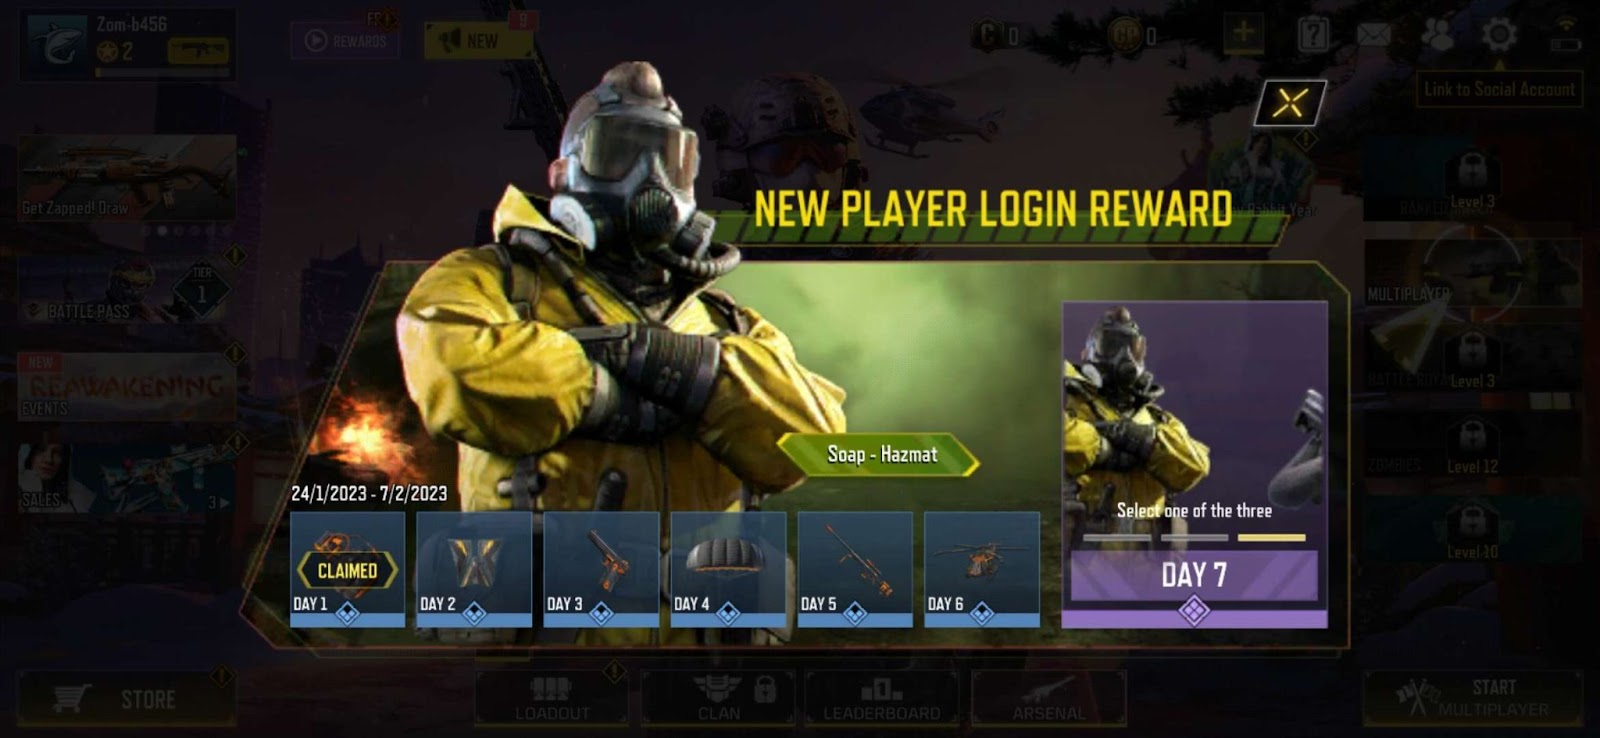 How To Link Up CoD Account To Earn Rewards In Call Of Duty: Mobile